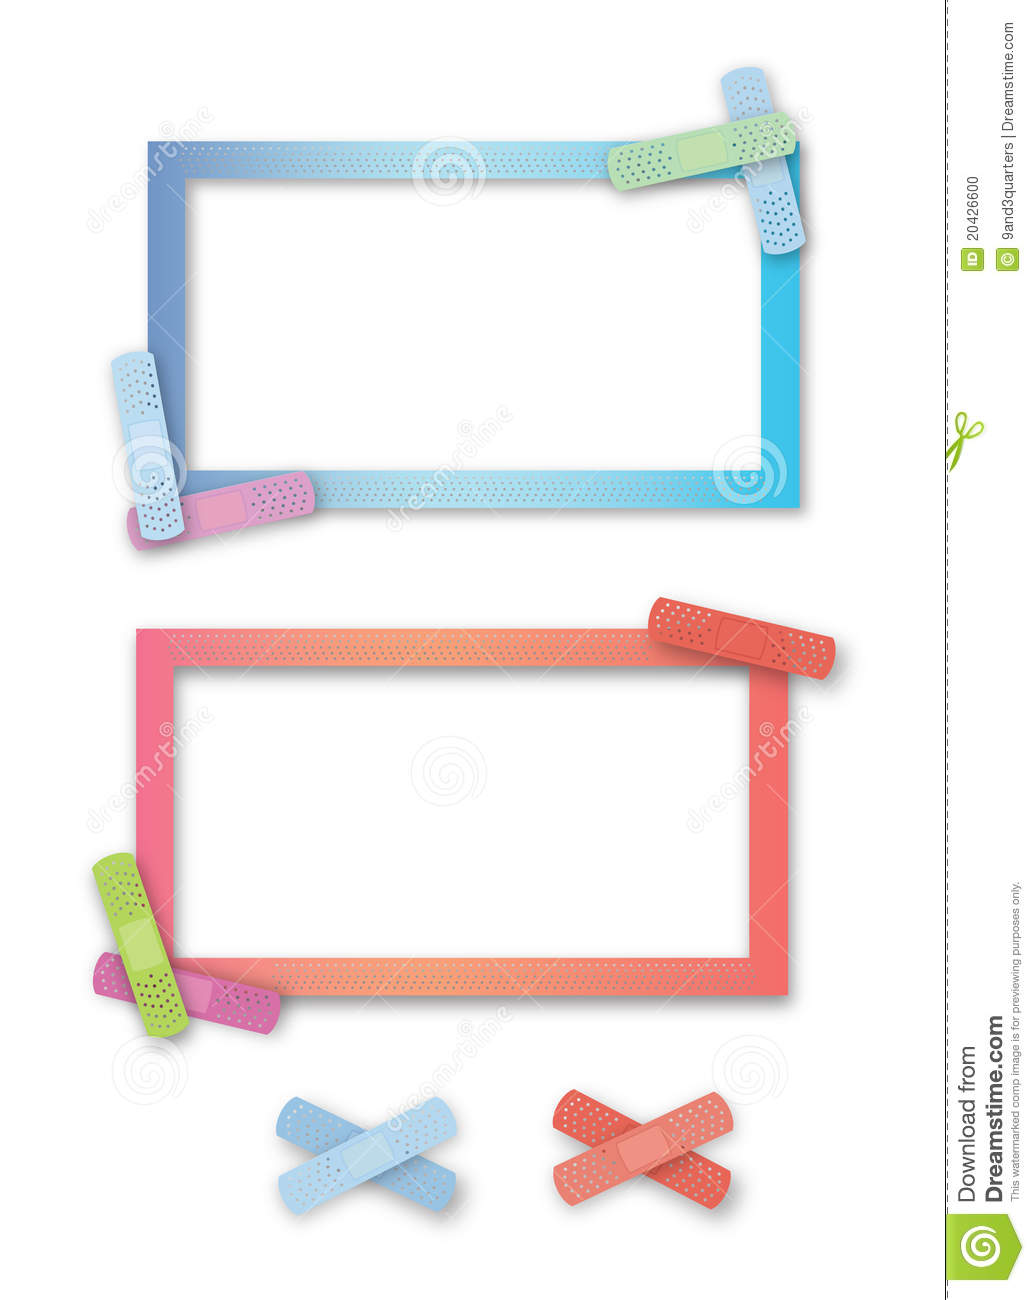 Brightly Colored Band Aid Borders Stock Photo   Image  20426600